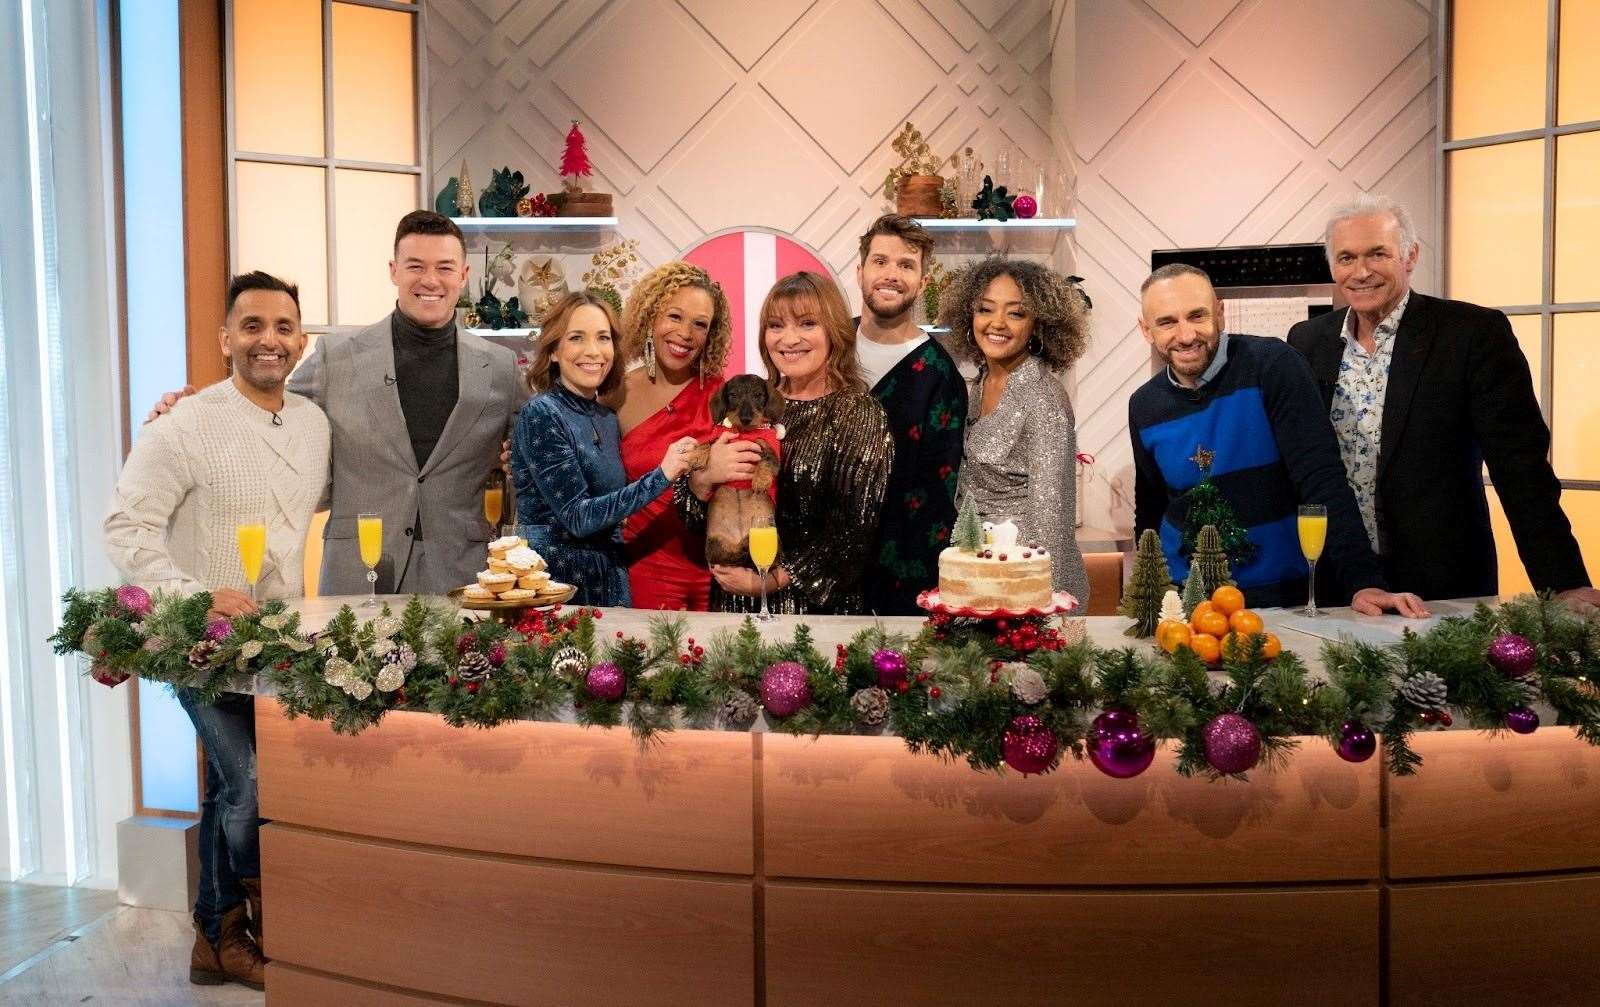 Lorraine Kelly is joined by a variety of guests (ITV/PA)